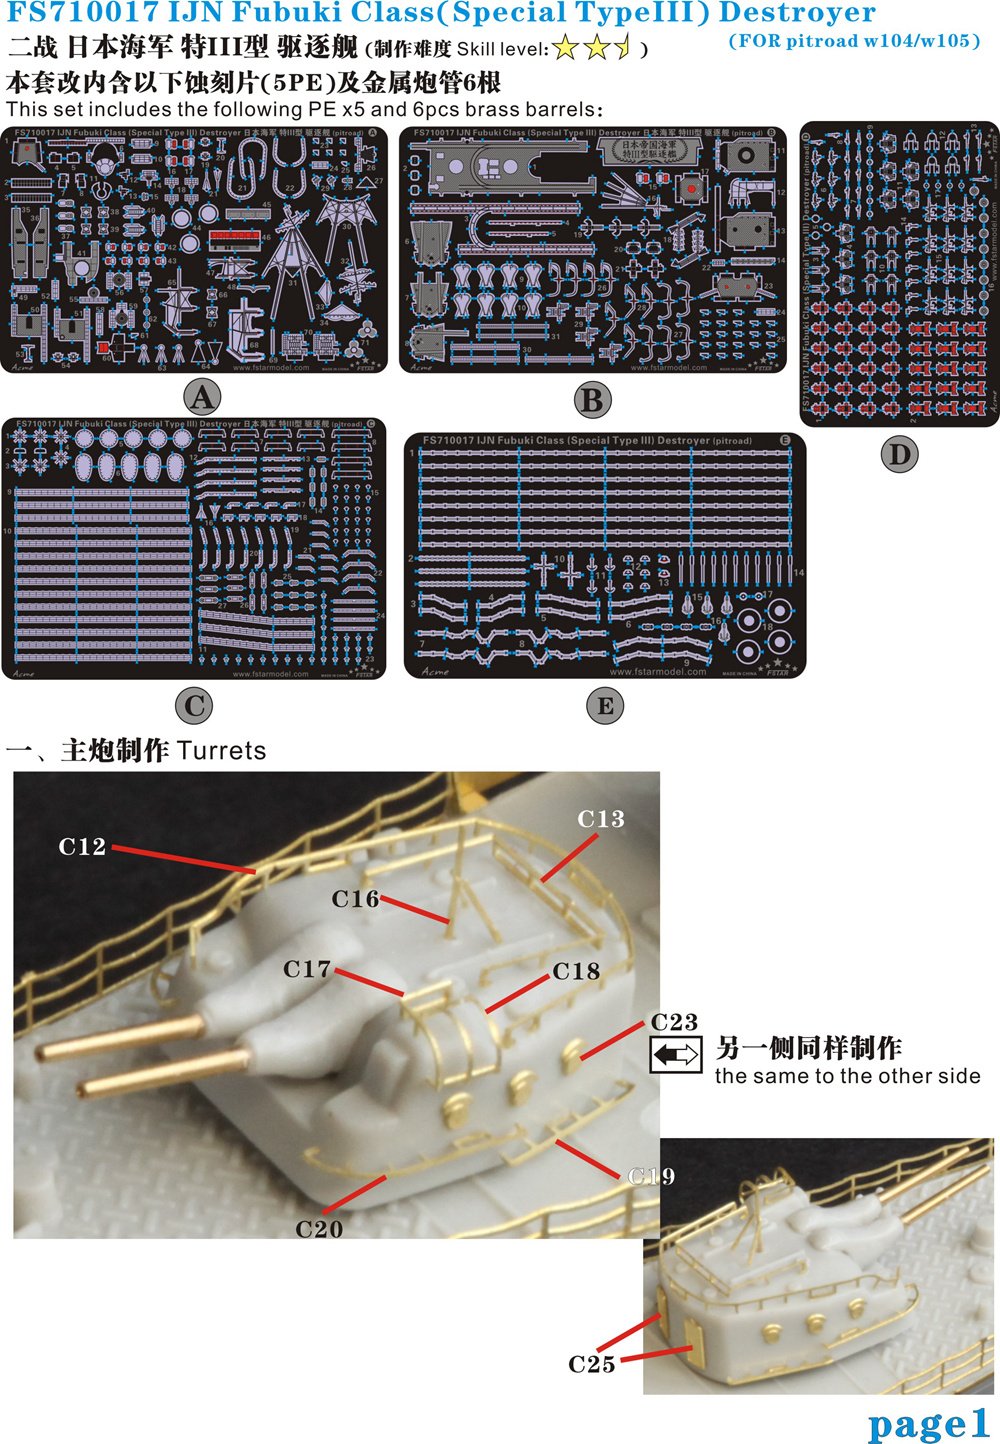 1/700 IJN Fubuki Class (Special Type III) Destroyer Upgrade Set - Click Image to Close